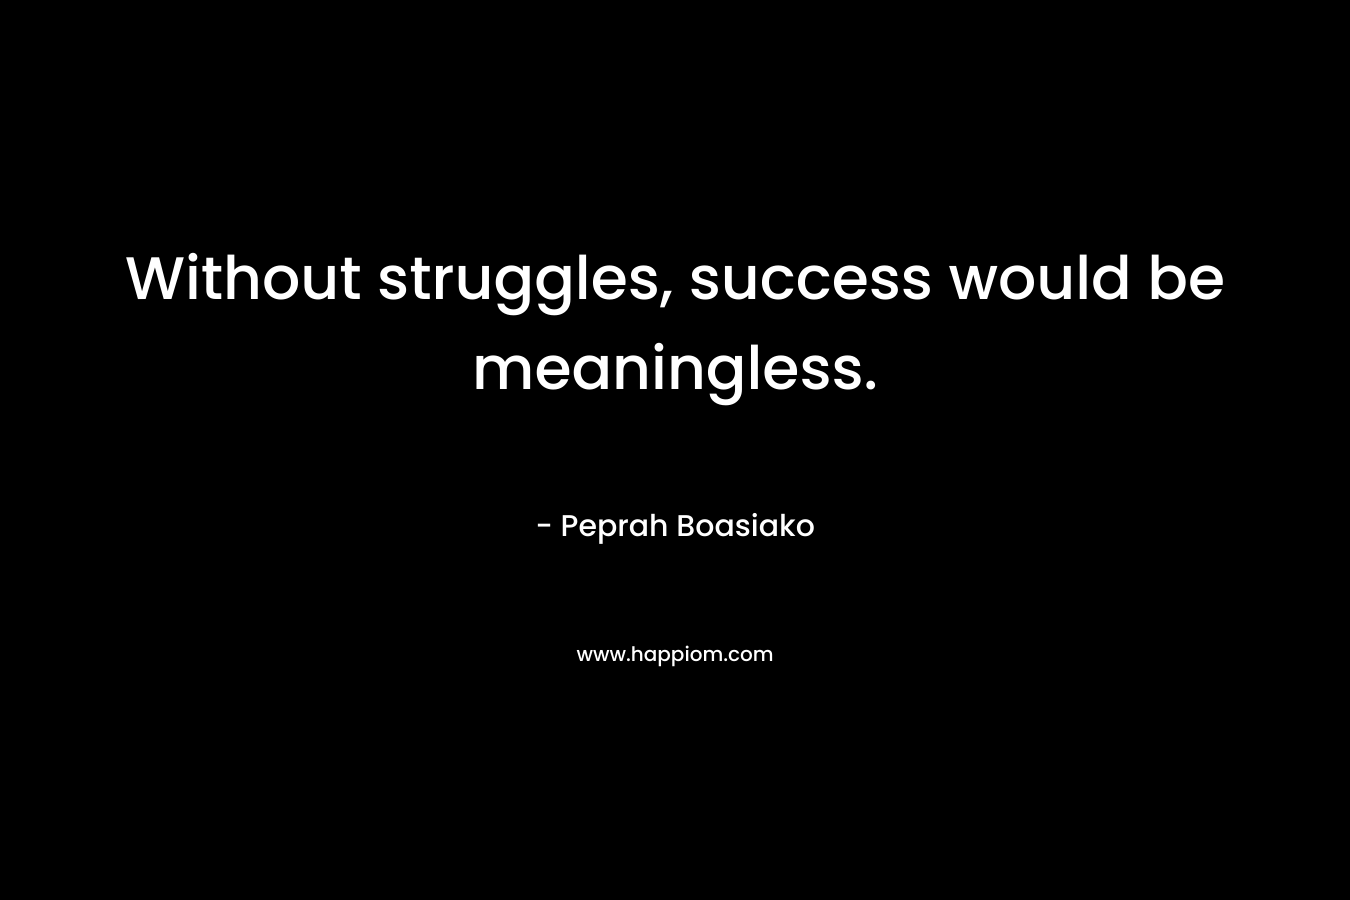 Without struggles, success would be meaningless. – Peprah Boasiako